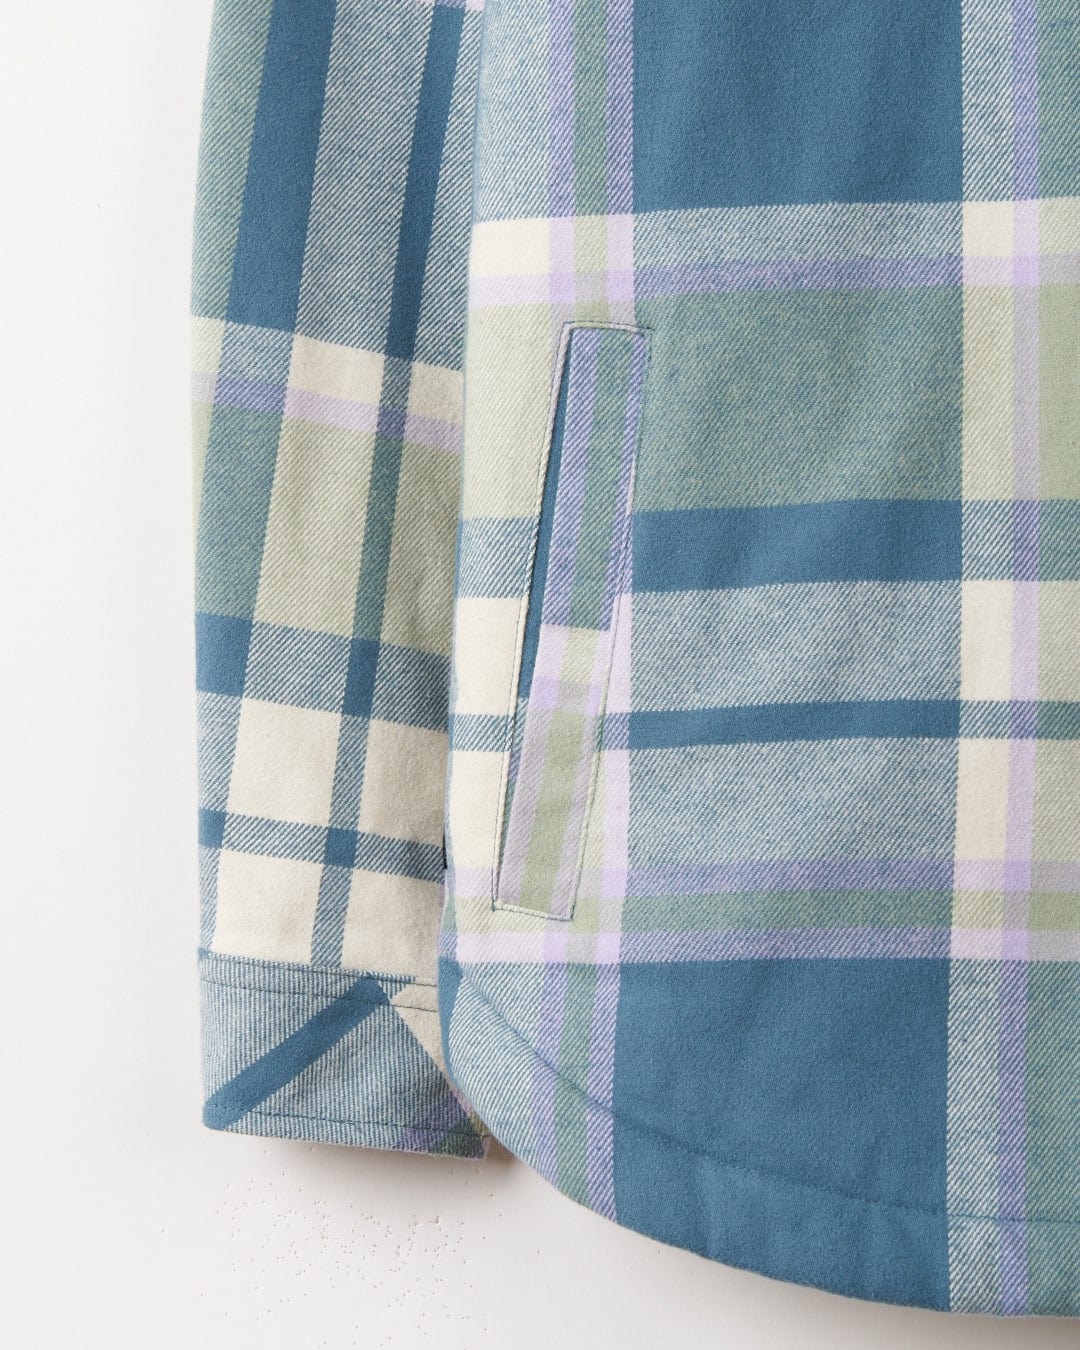 A Stella Women's Borg Lined Long Sleeve Shirt in Blue check print and green plaid hanging on a wall.